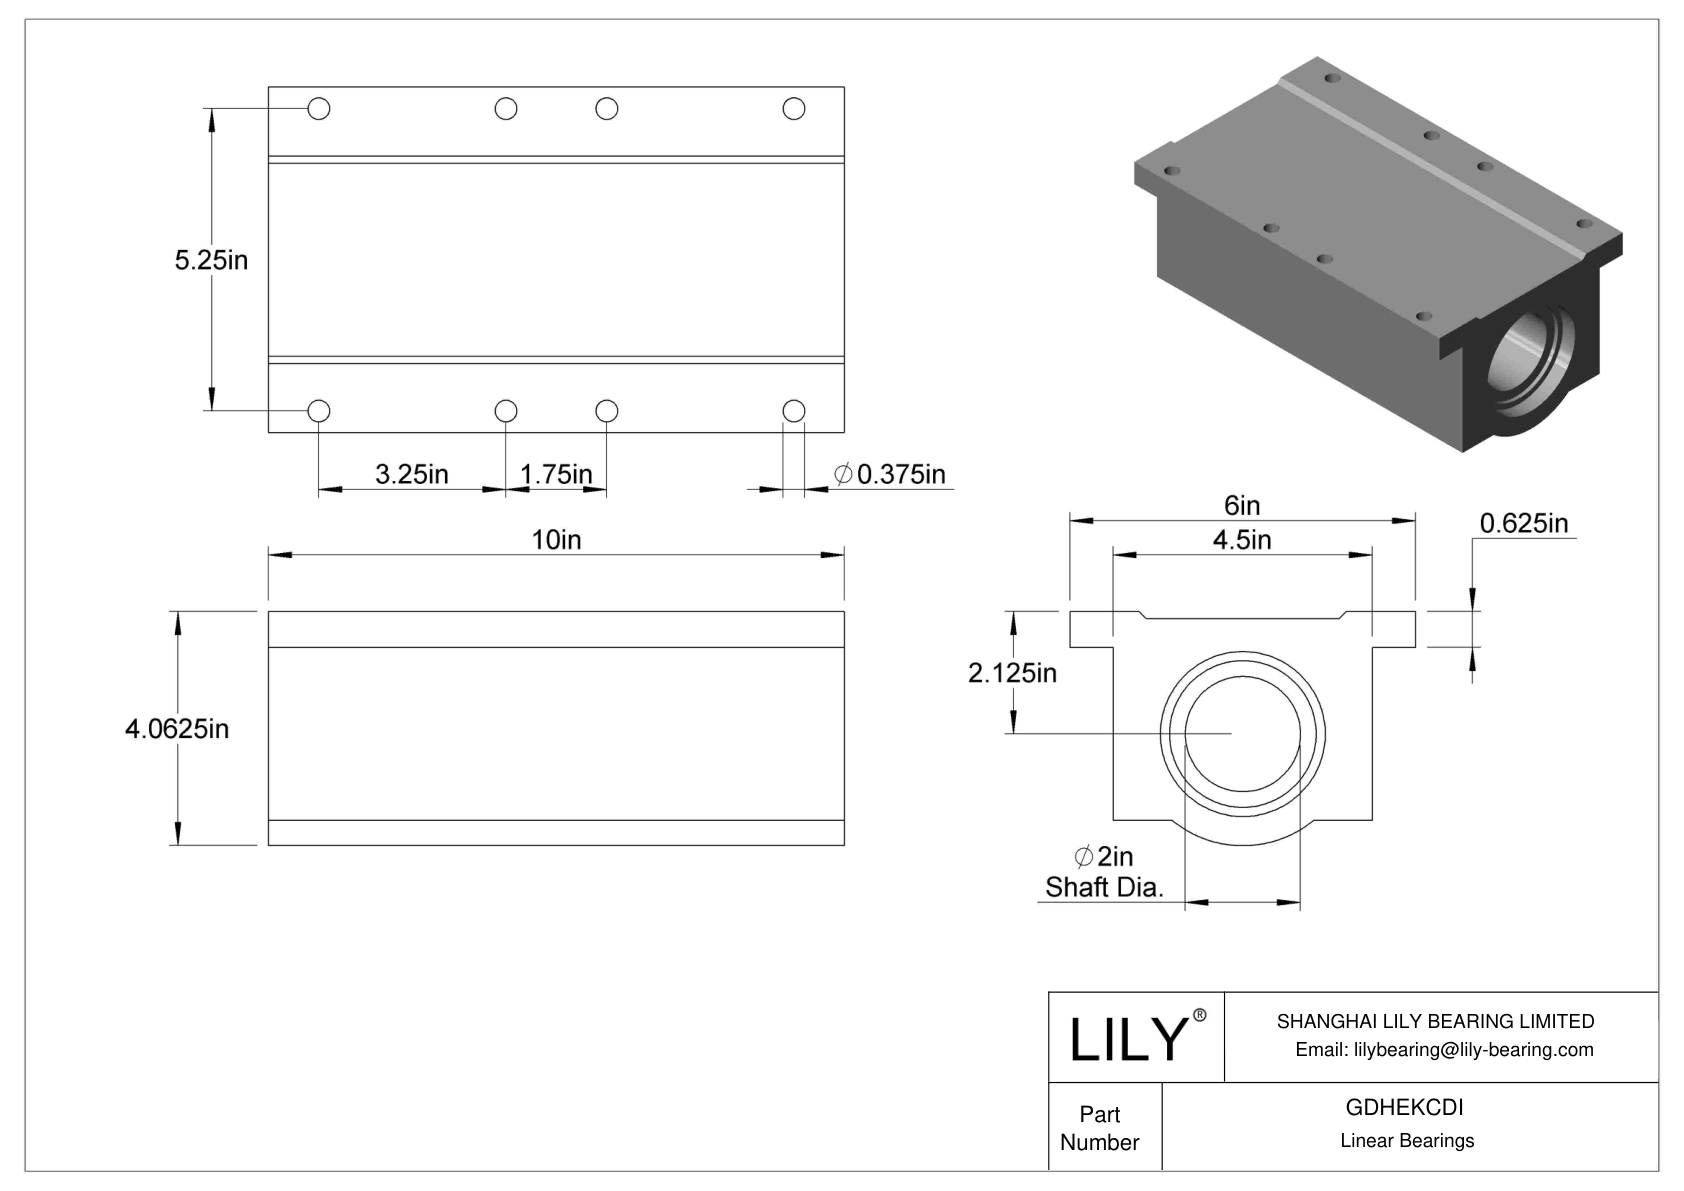 GDHEKCDI Common Mounted Linear Sleeve Bearings cad drawing